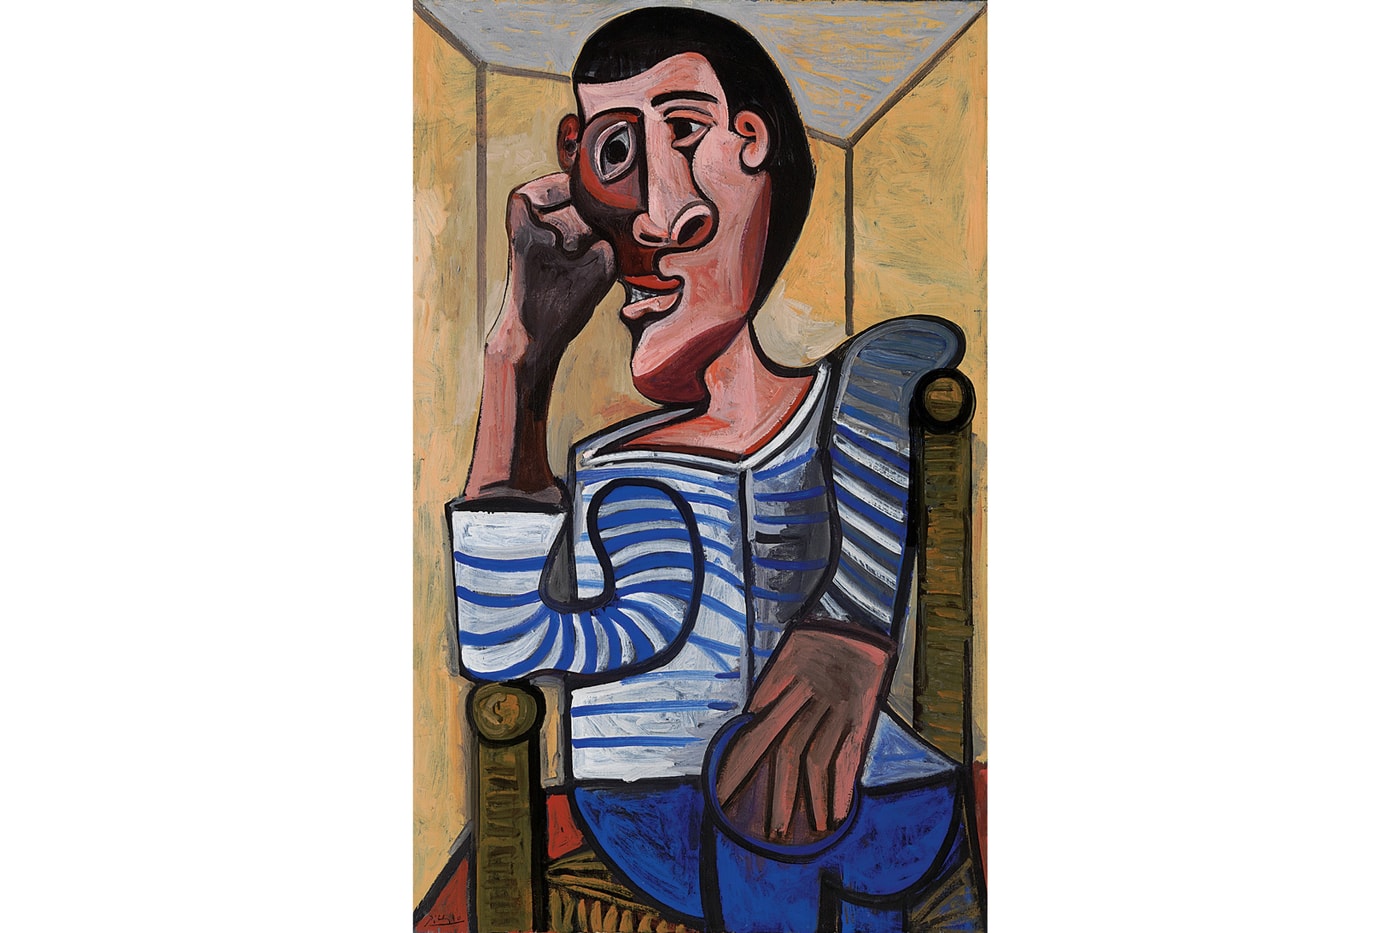 pablo picasso le marin christies auction may sale art artwork